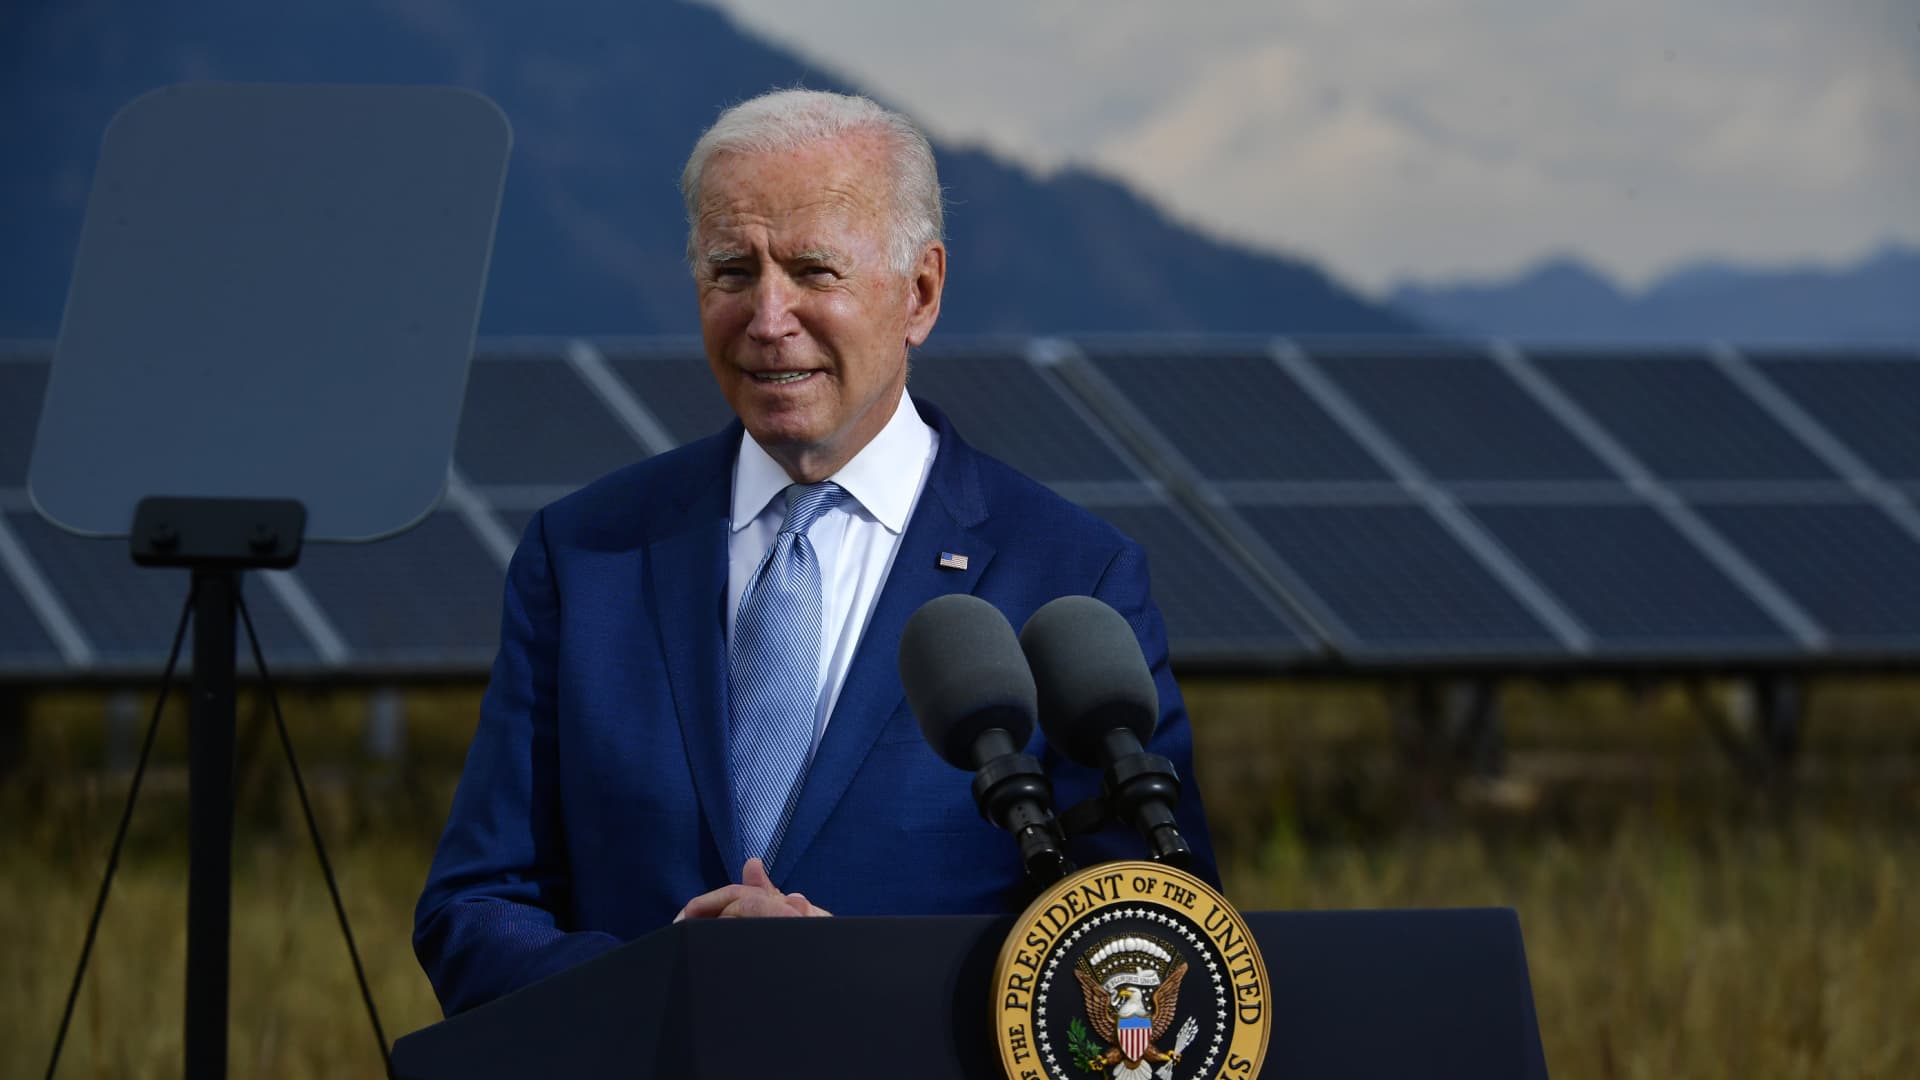 President Joe Biden makes remarks during a press conference on the grounds of National Renewable Energy Laboratory (NREL) on September 14, 2021 in Arvada, Colorado.